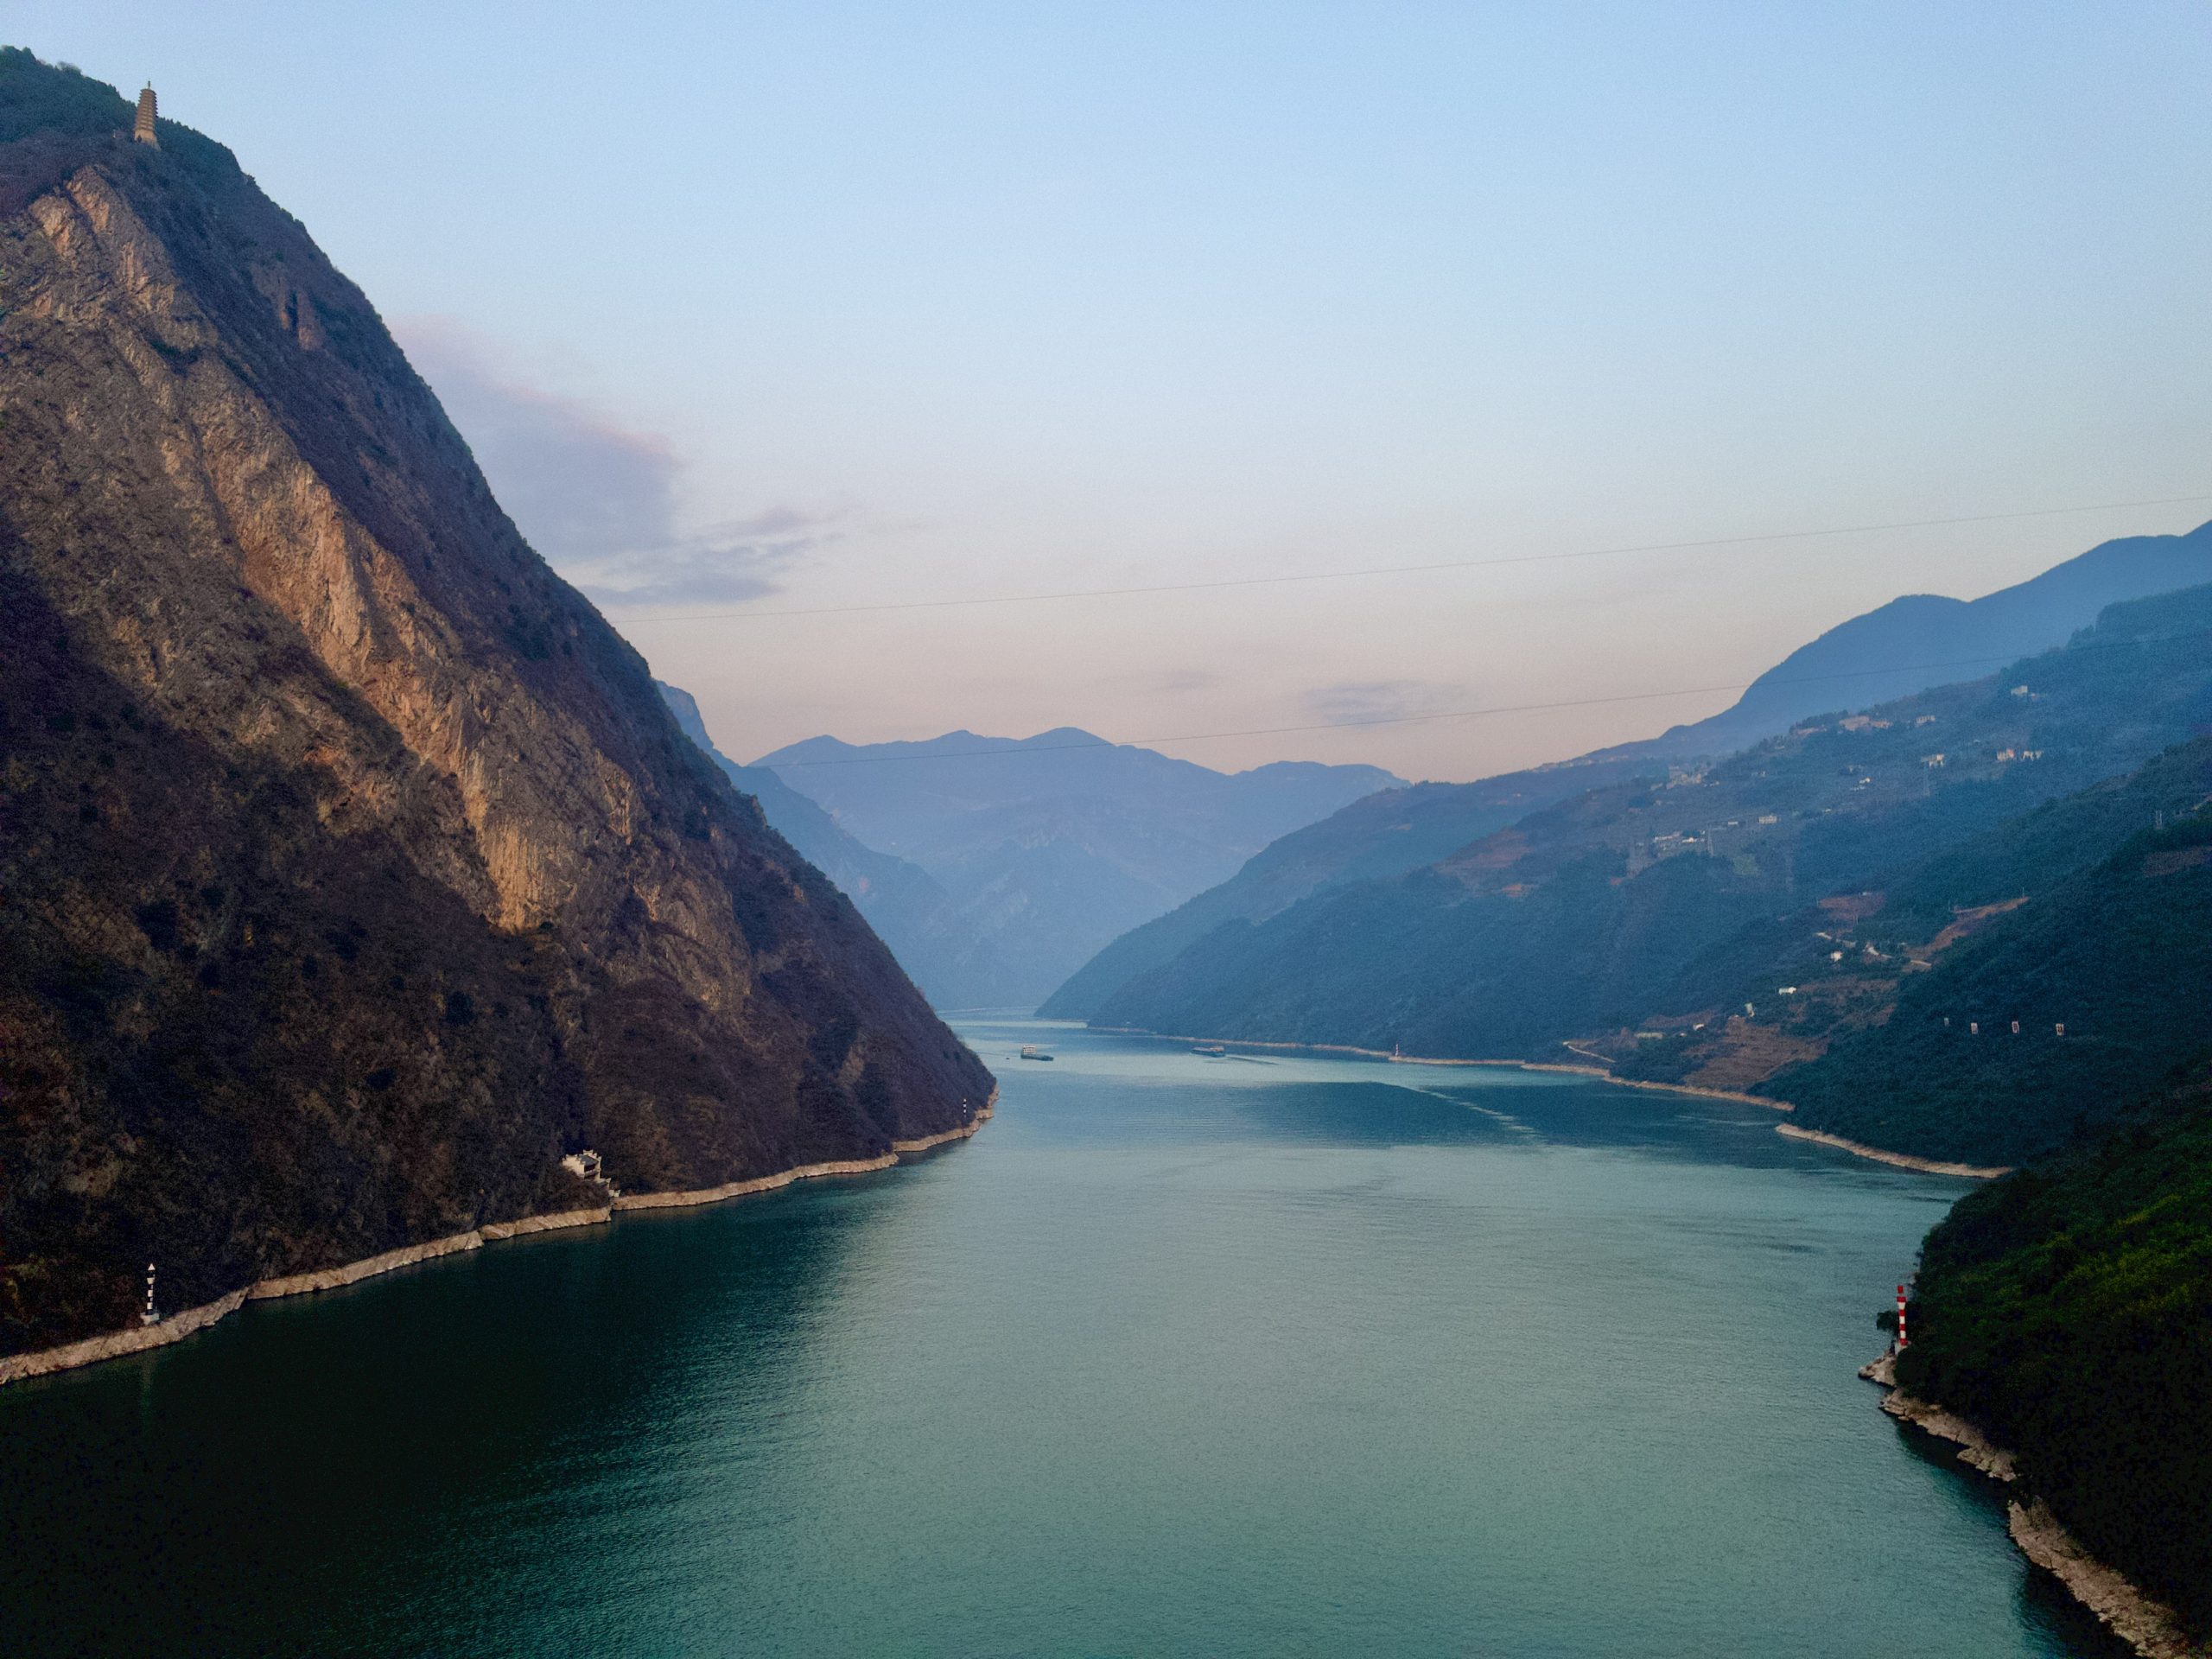 discover the beauty and history of the yangtze river, the longest river in asia, with its stunning landscapes and cultural significance.